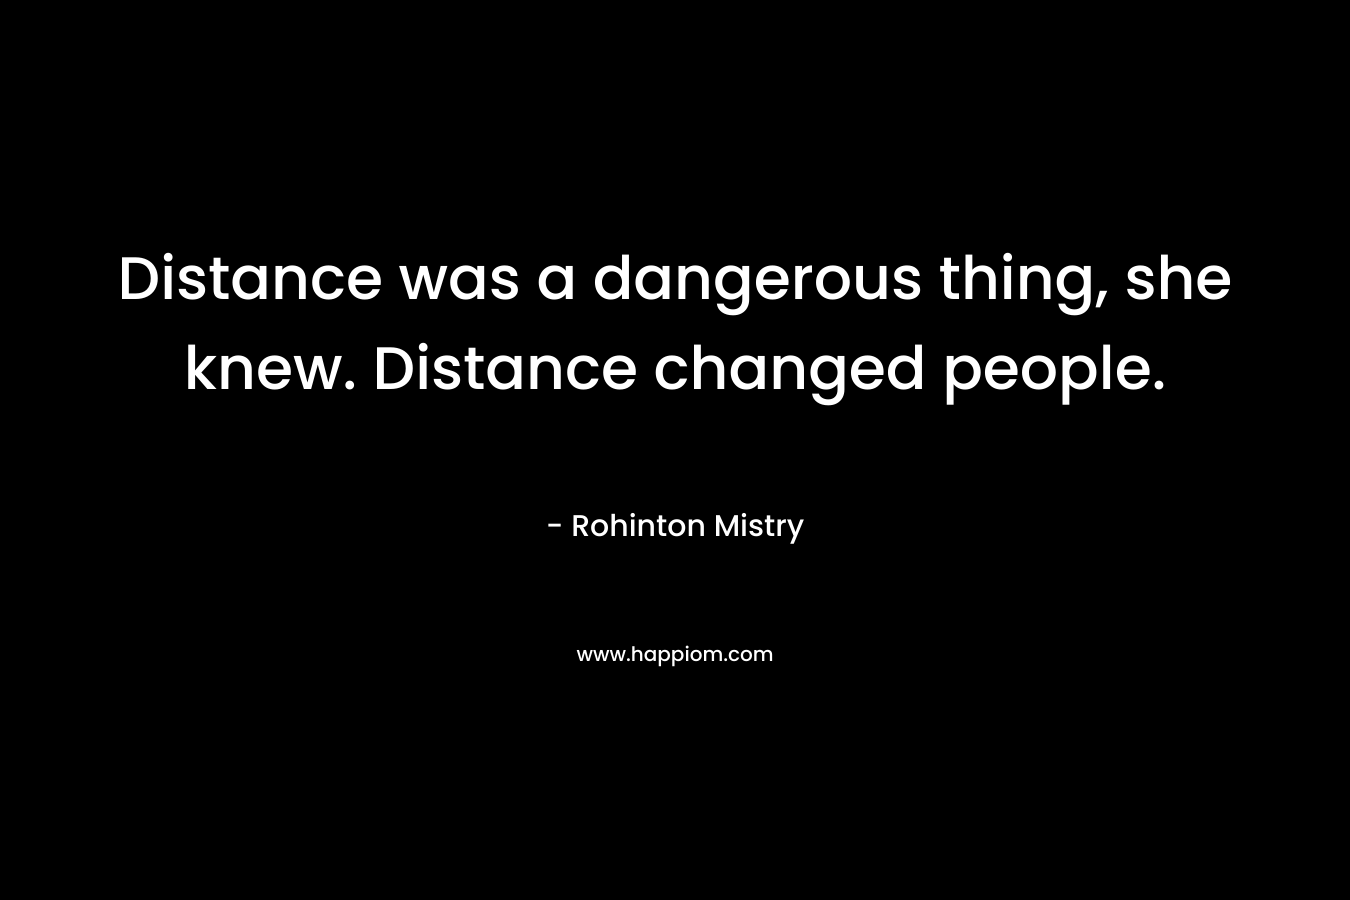 Distance was a dangerous thing, she knew. Distance changed people. – Rohinton Mistry